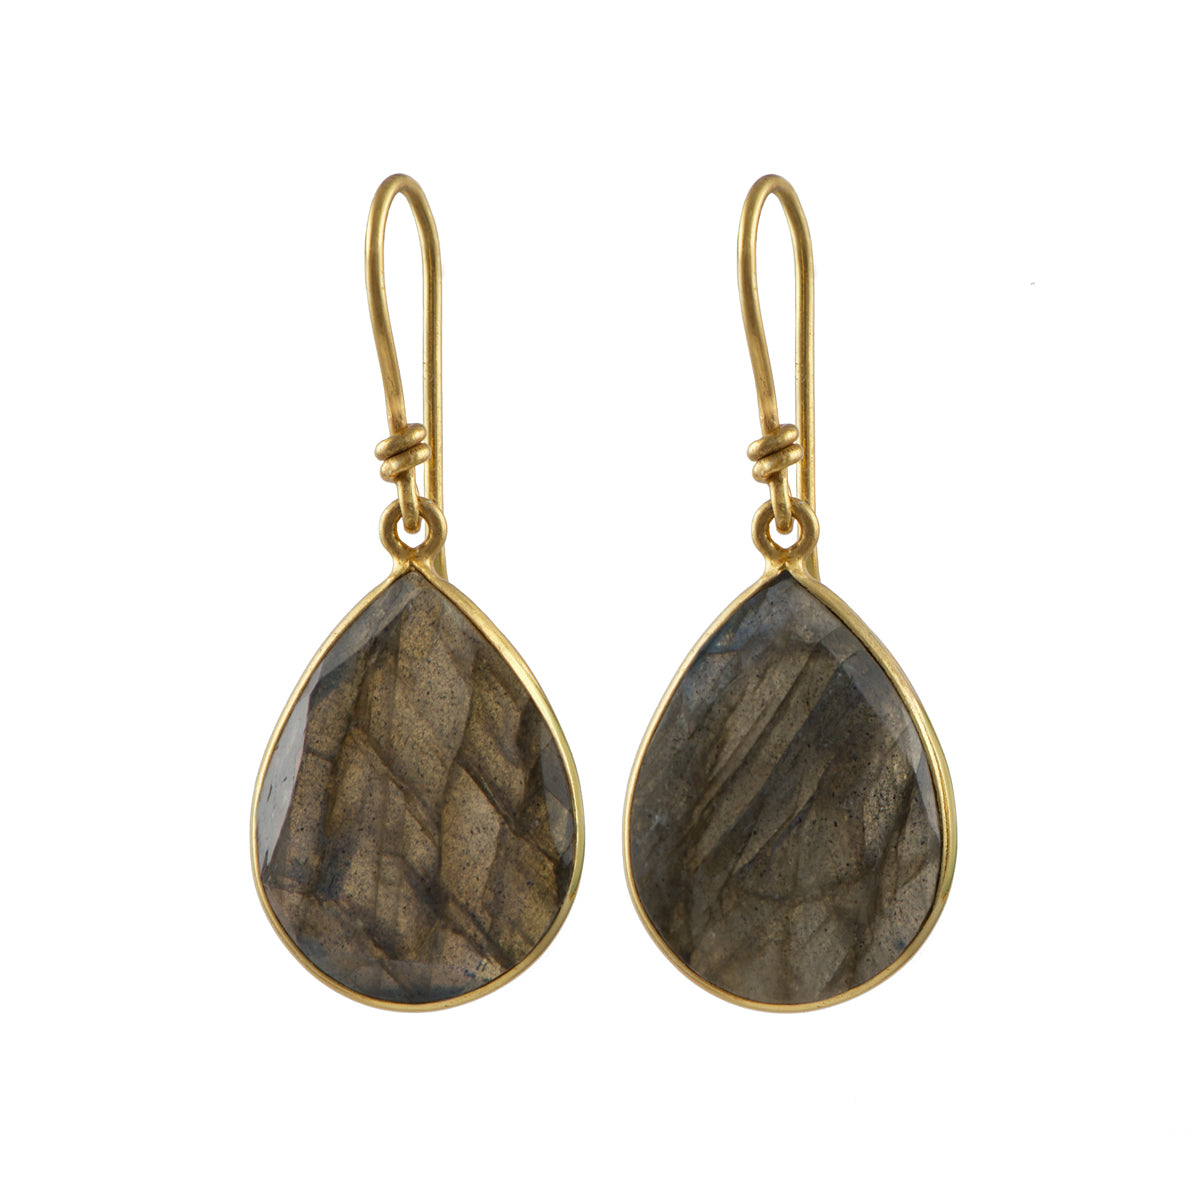 Labradorite Gold Plated Sterling Silver Earrings with a Tear Drop Shaped Gemstone